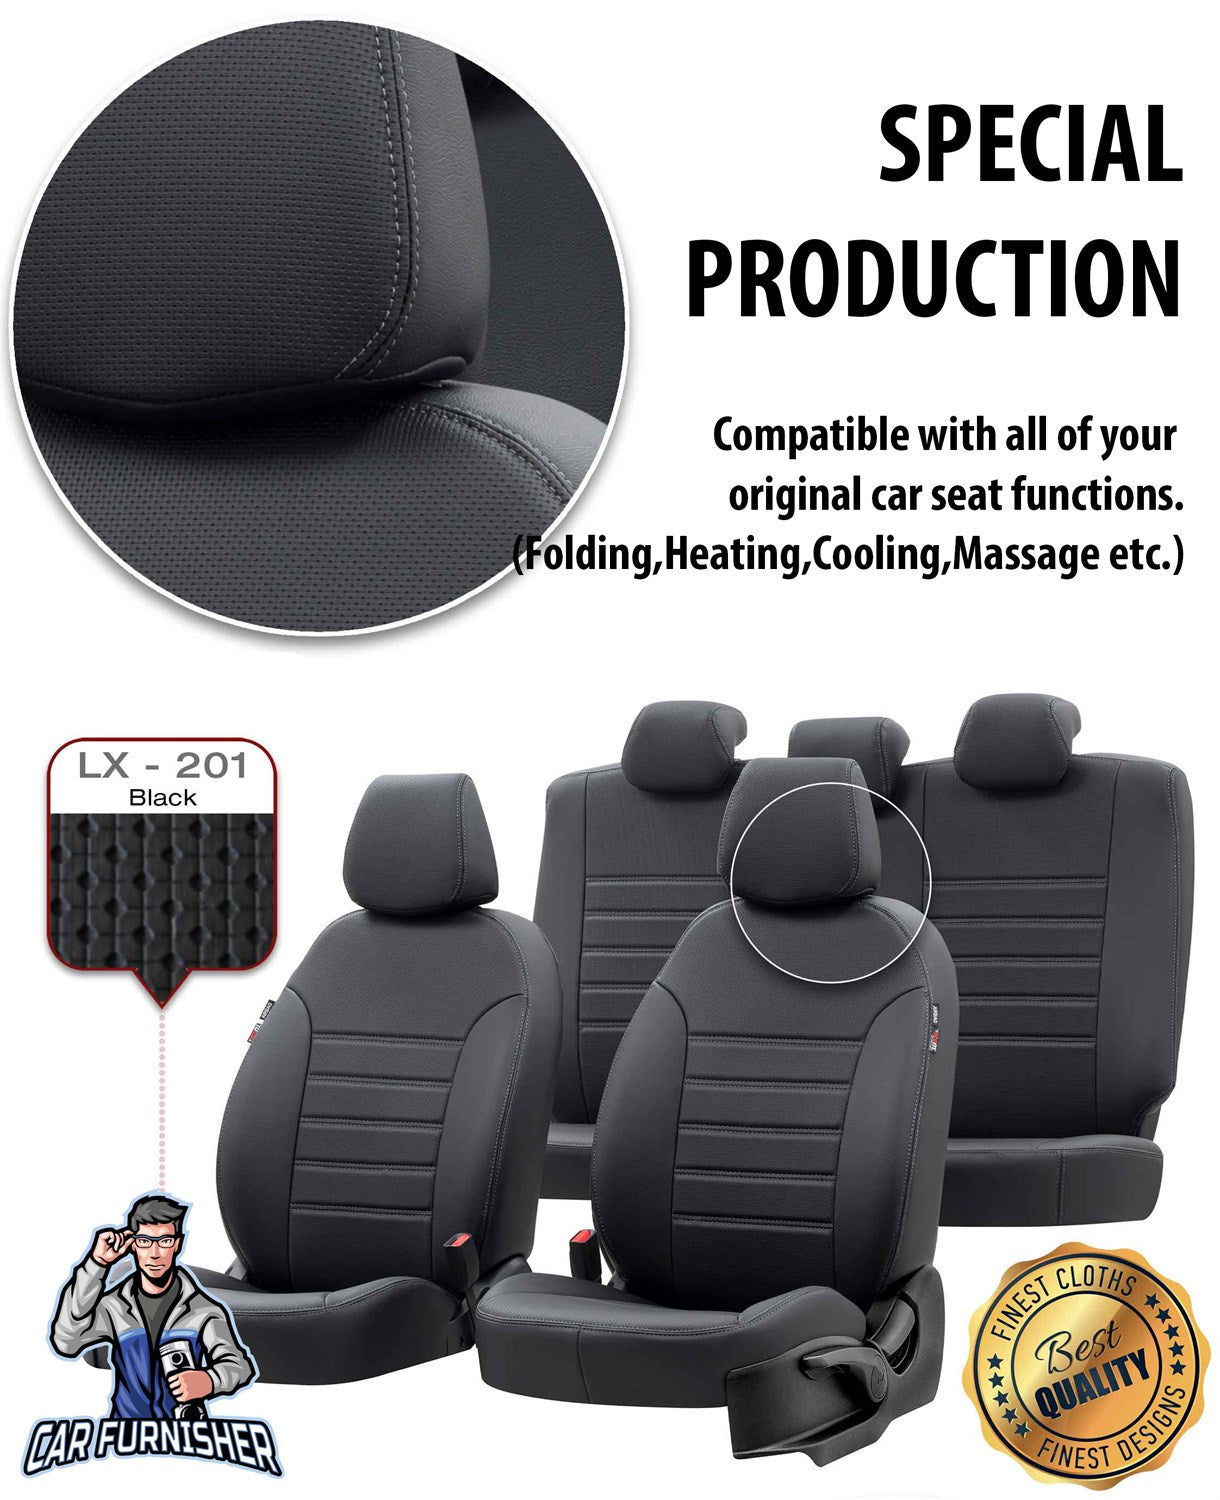 Mercedes Citan Seat Covers New York Leather Design Smoked Black Leather